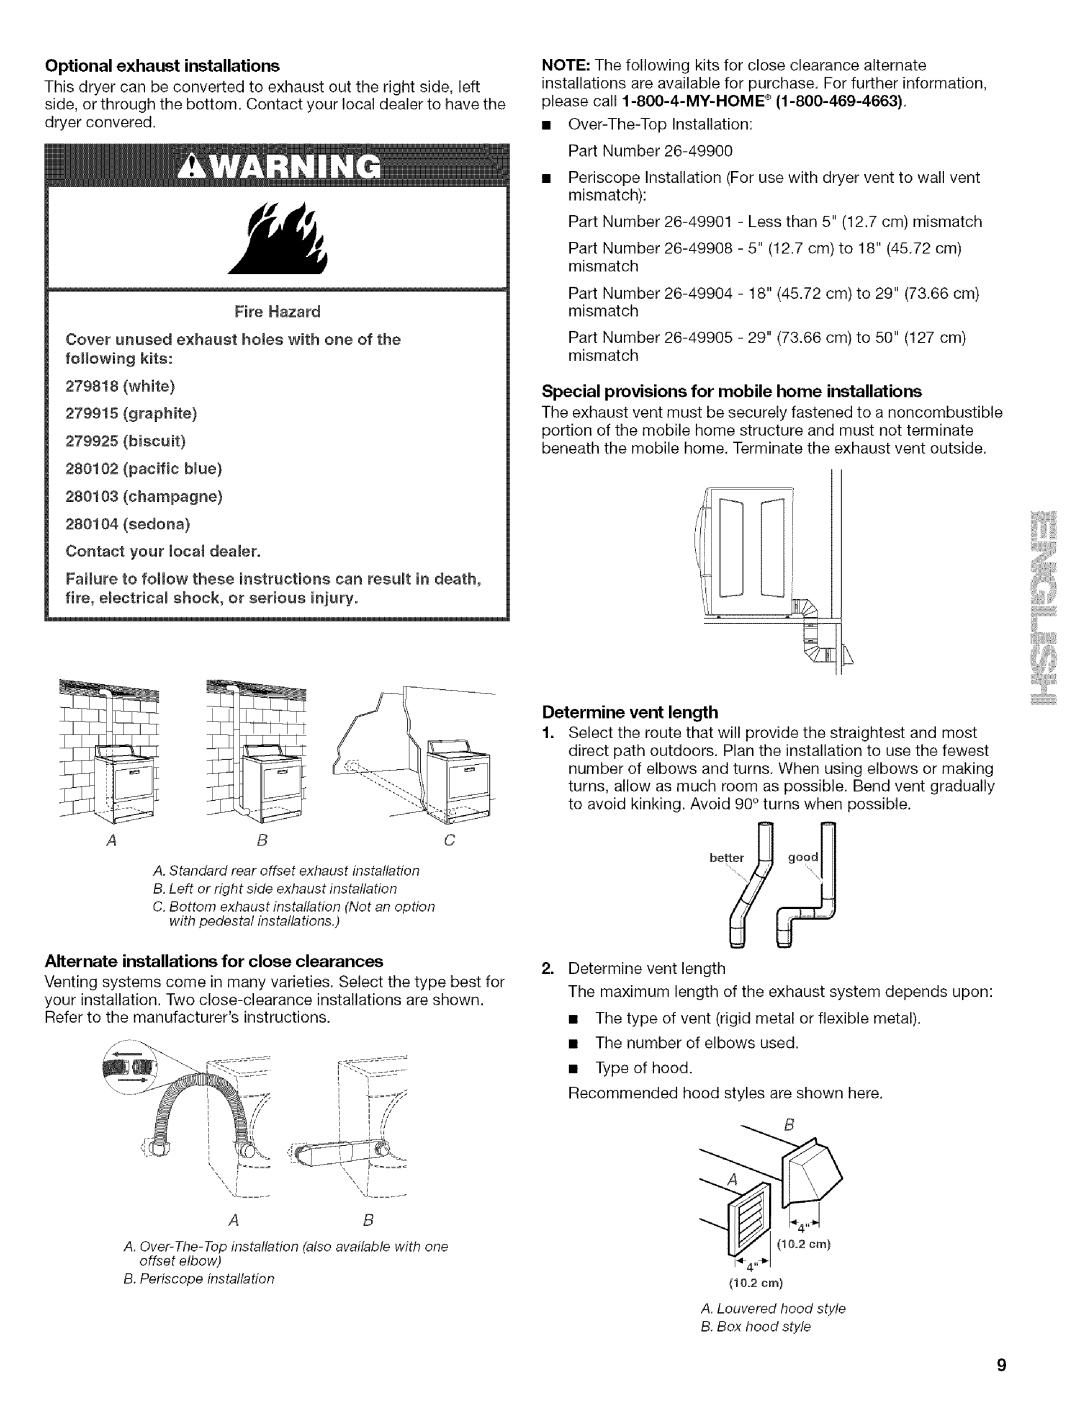 Kenmore C8587 Typeof hood Recommended hood styles are shown here, Optional exhaust installations, graphite 279925 biscuit 